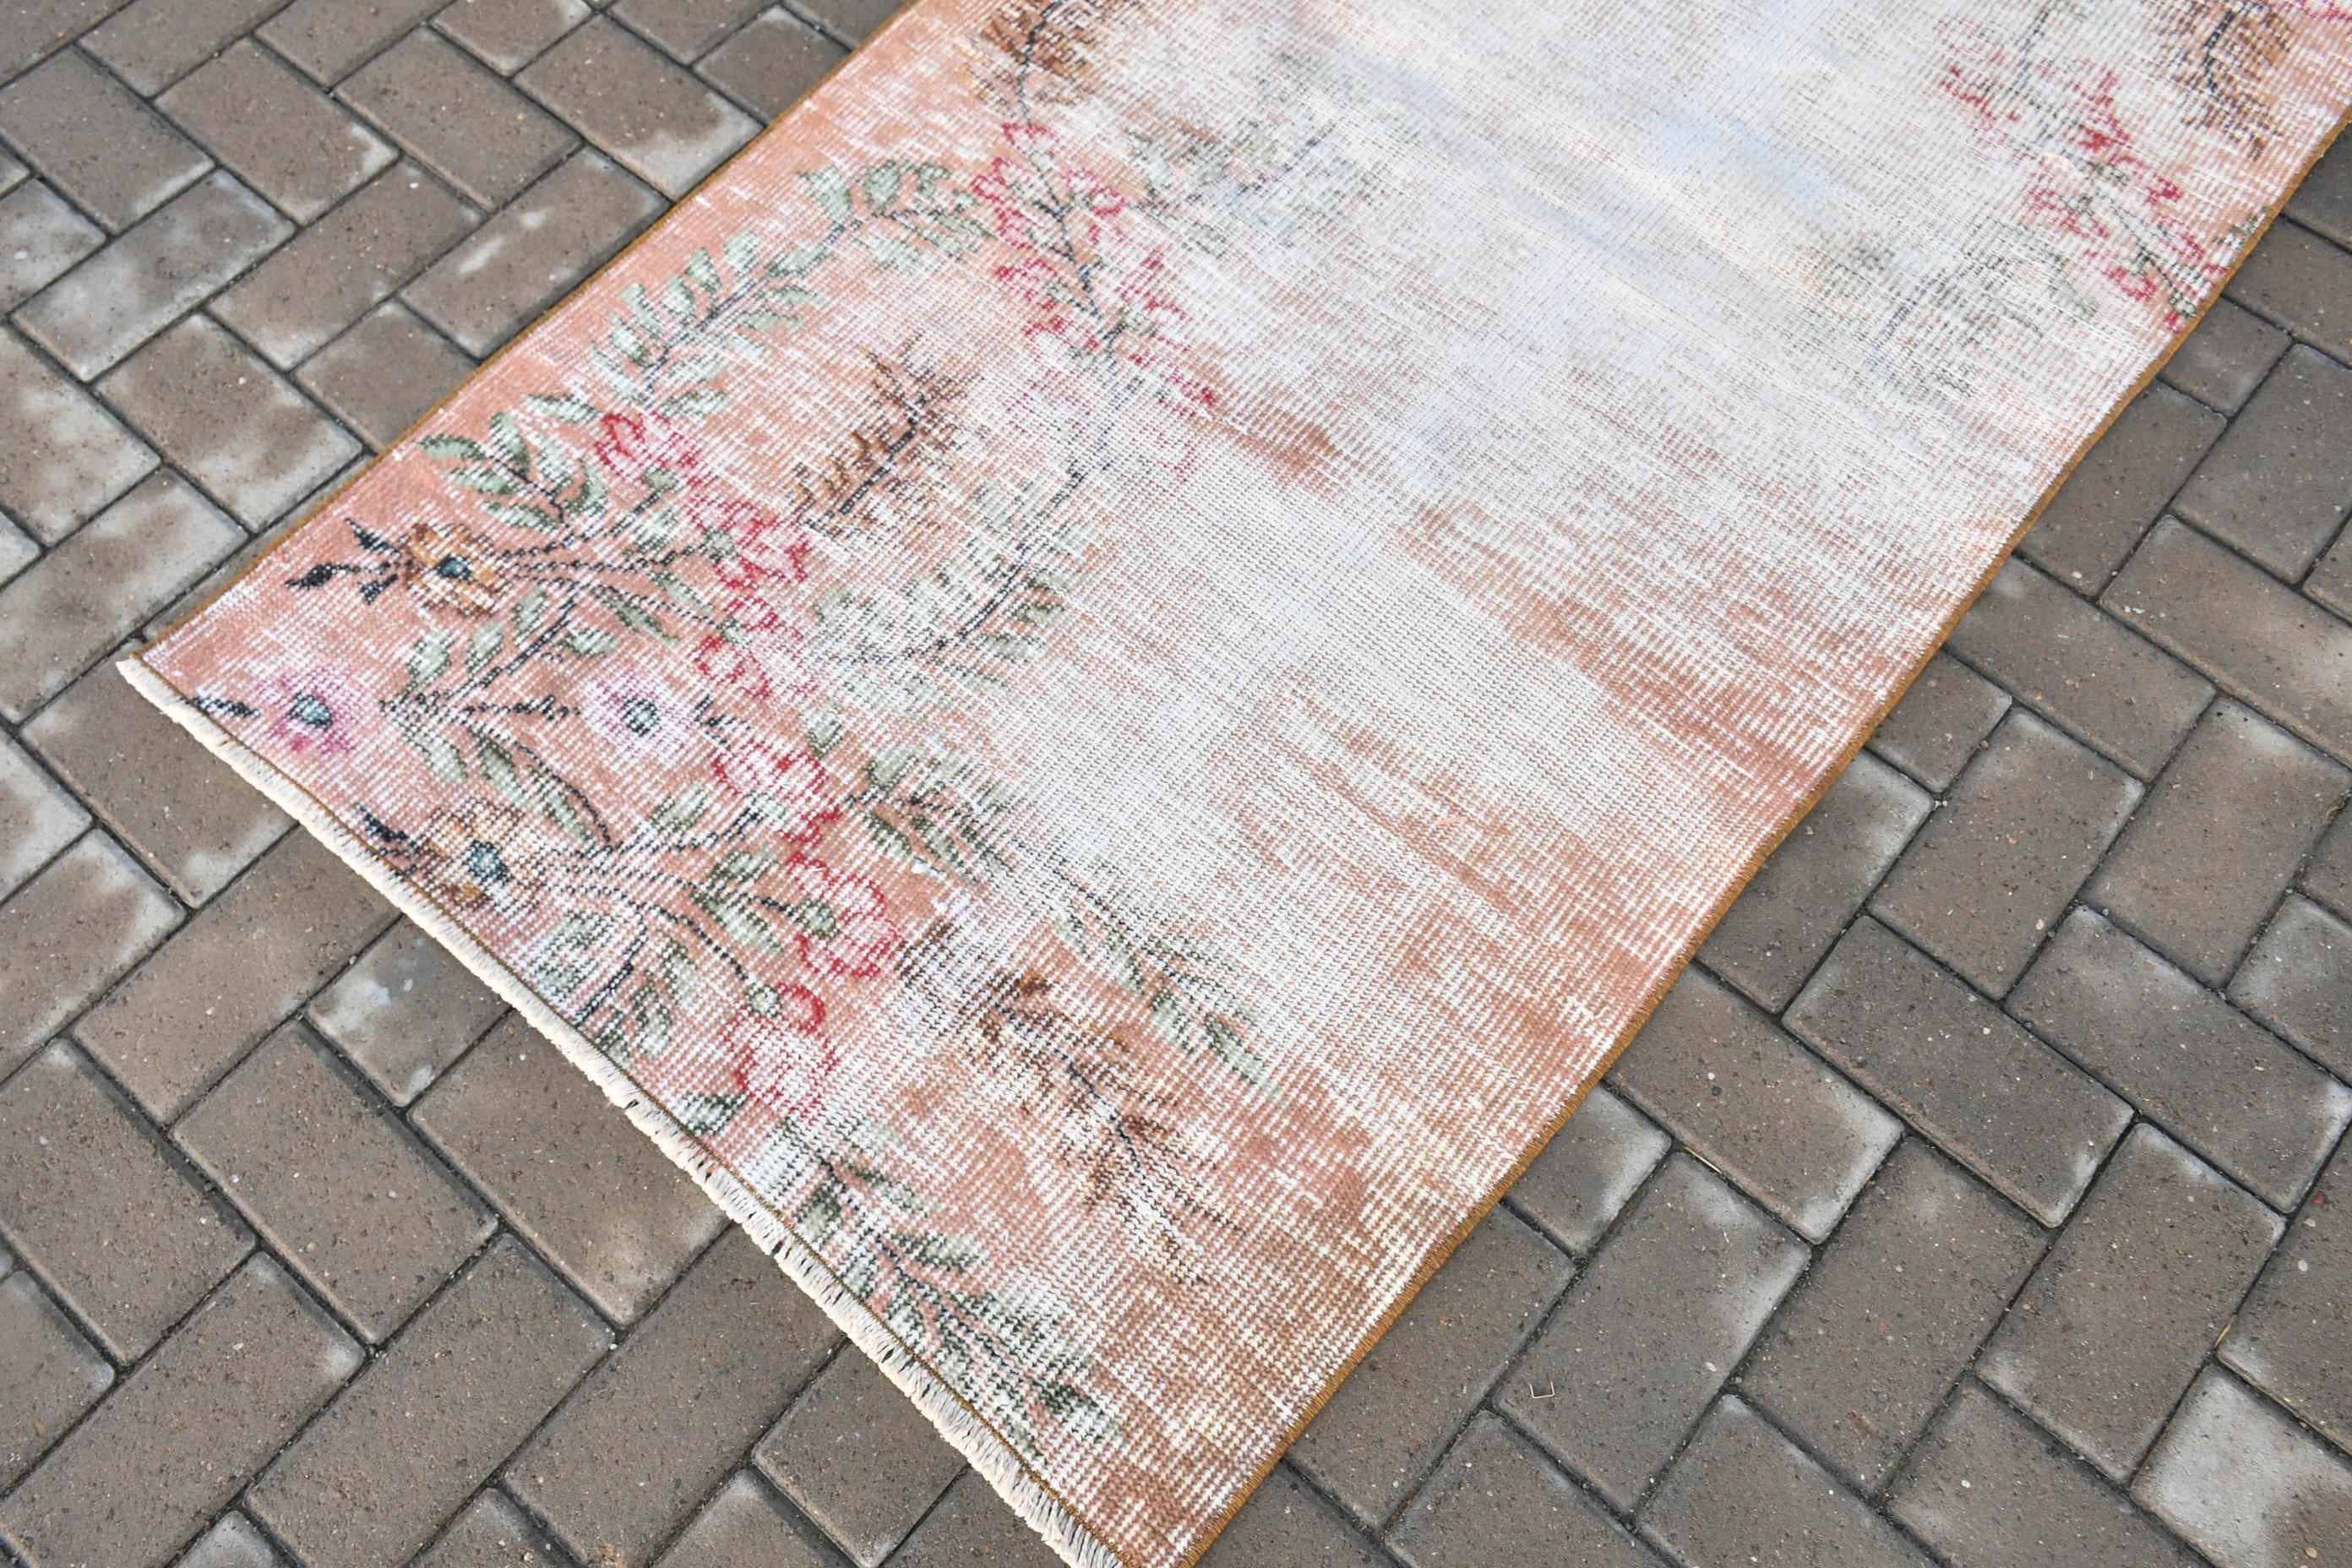 Nursery Rugs, Turkish Rug, 3.1x6.3 ft Accent Rug, Rugs for Entry, White Floor Rug, Kitchen Rugs, Vintage Rug, Office Rugs, Oushak Rugs